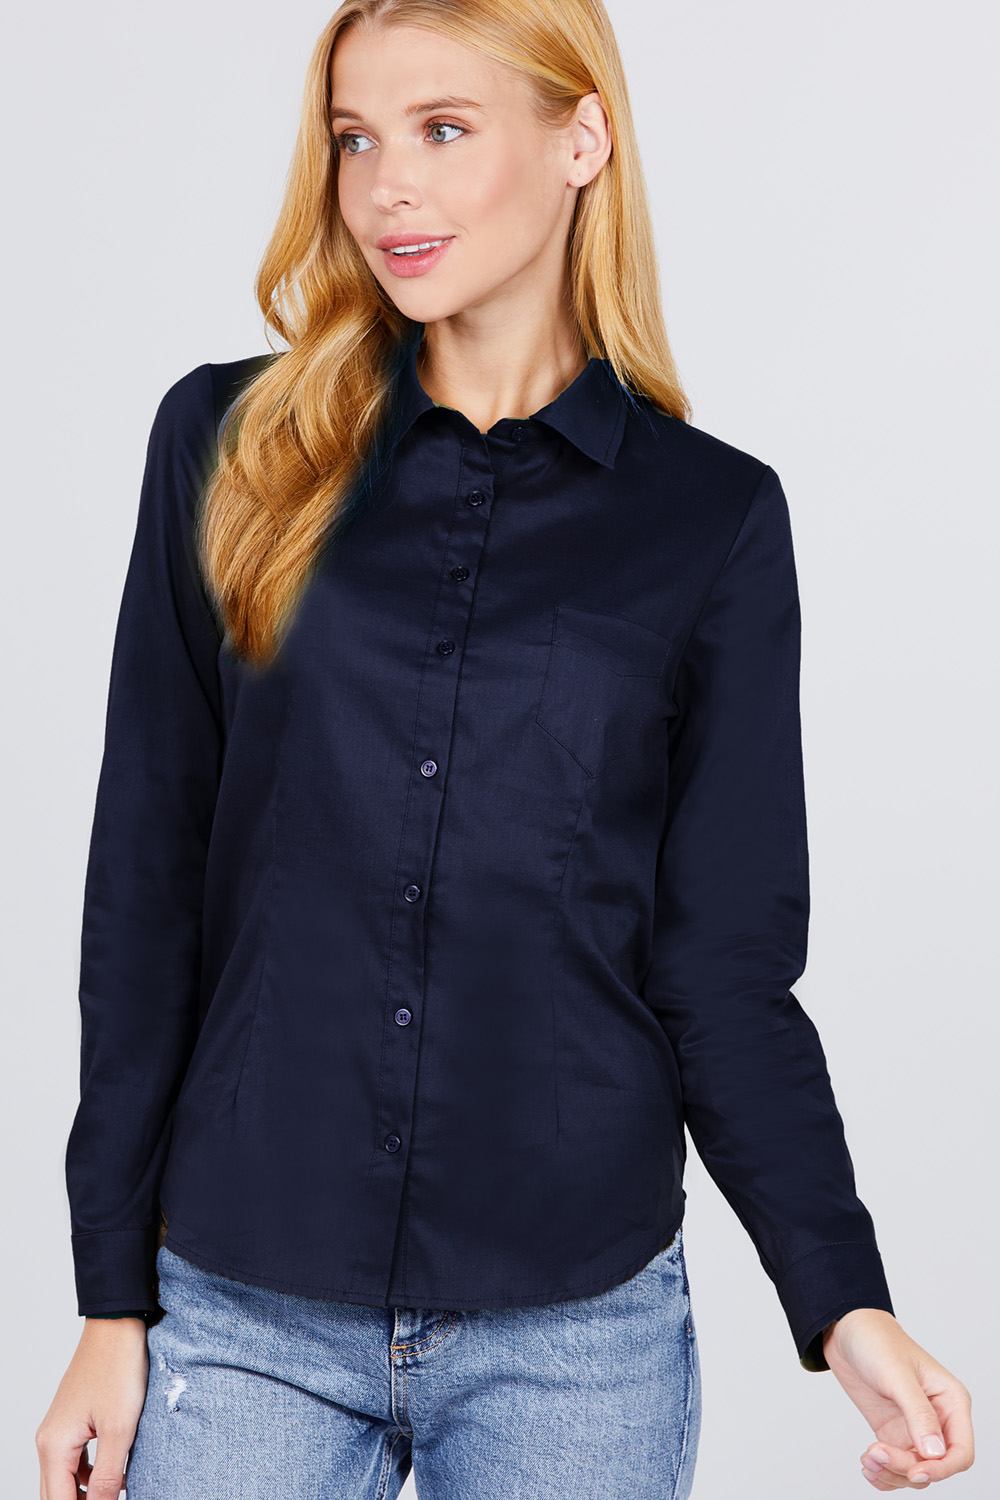 Long Sleeve Button Down Woven Shirts Women Business Formal Workwear Tops in Navy